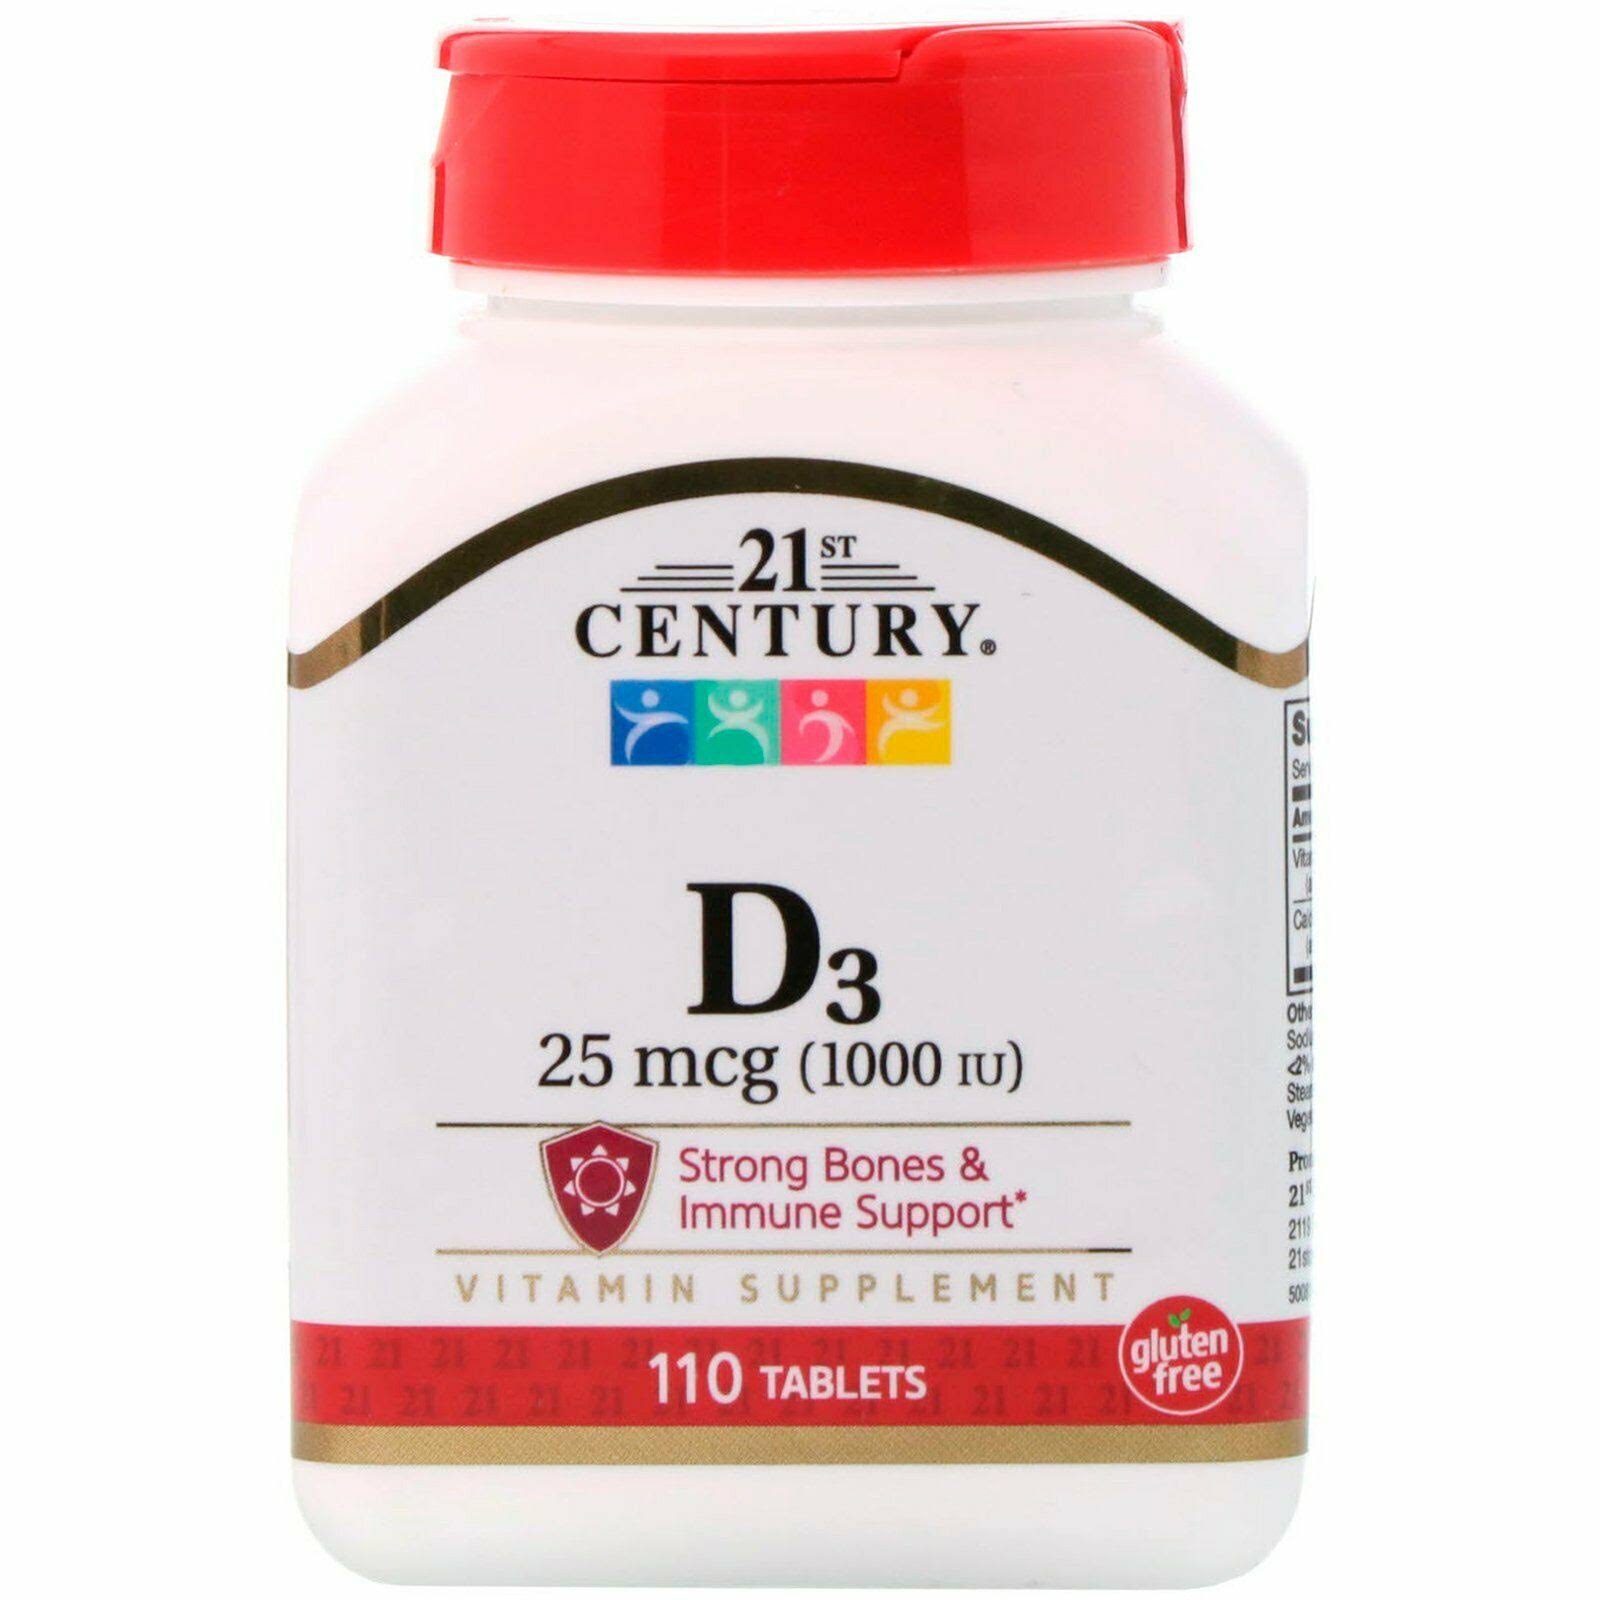 21st Century Health Care Vitamin D3 High Potency Supplement - 110 Tablets